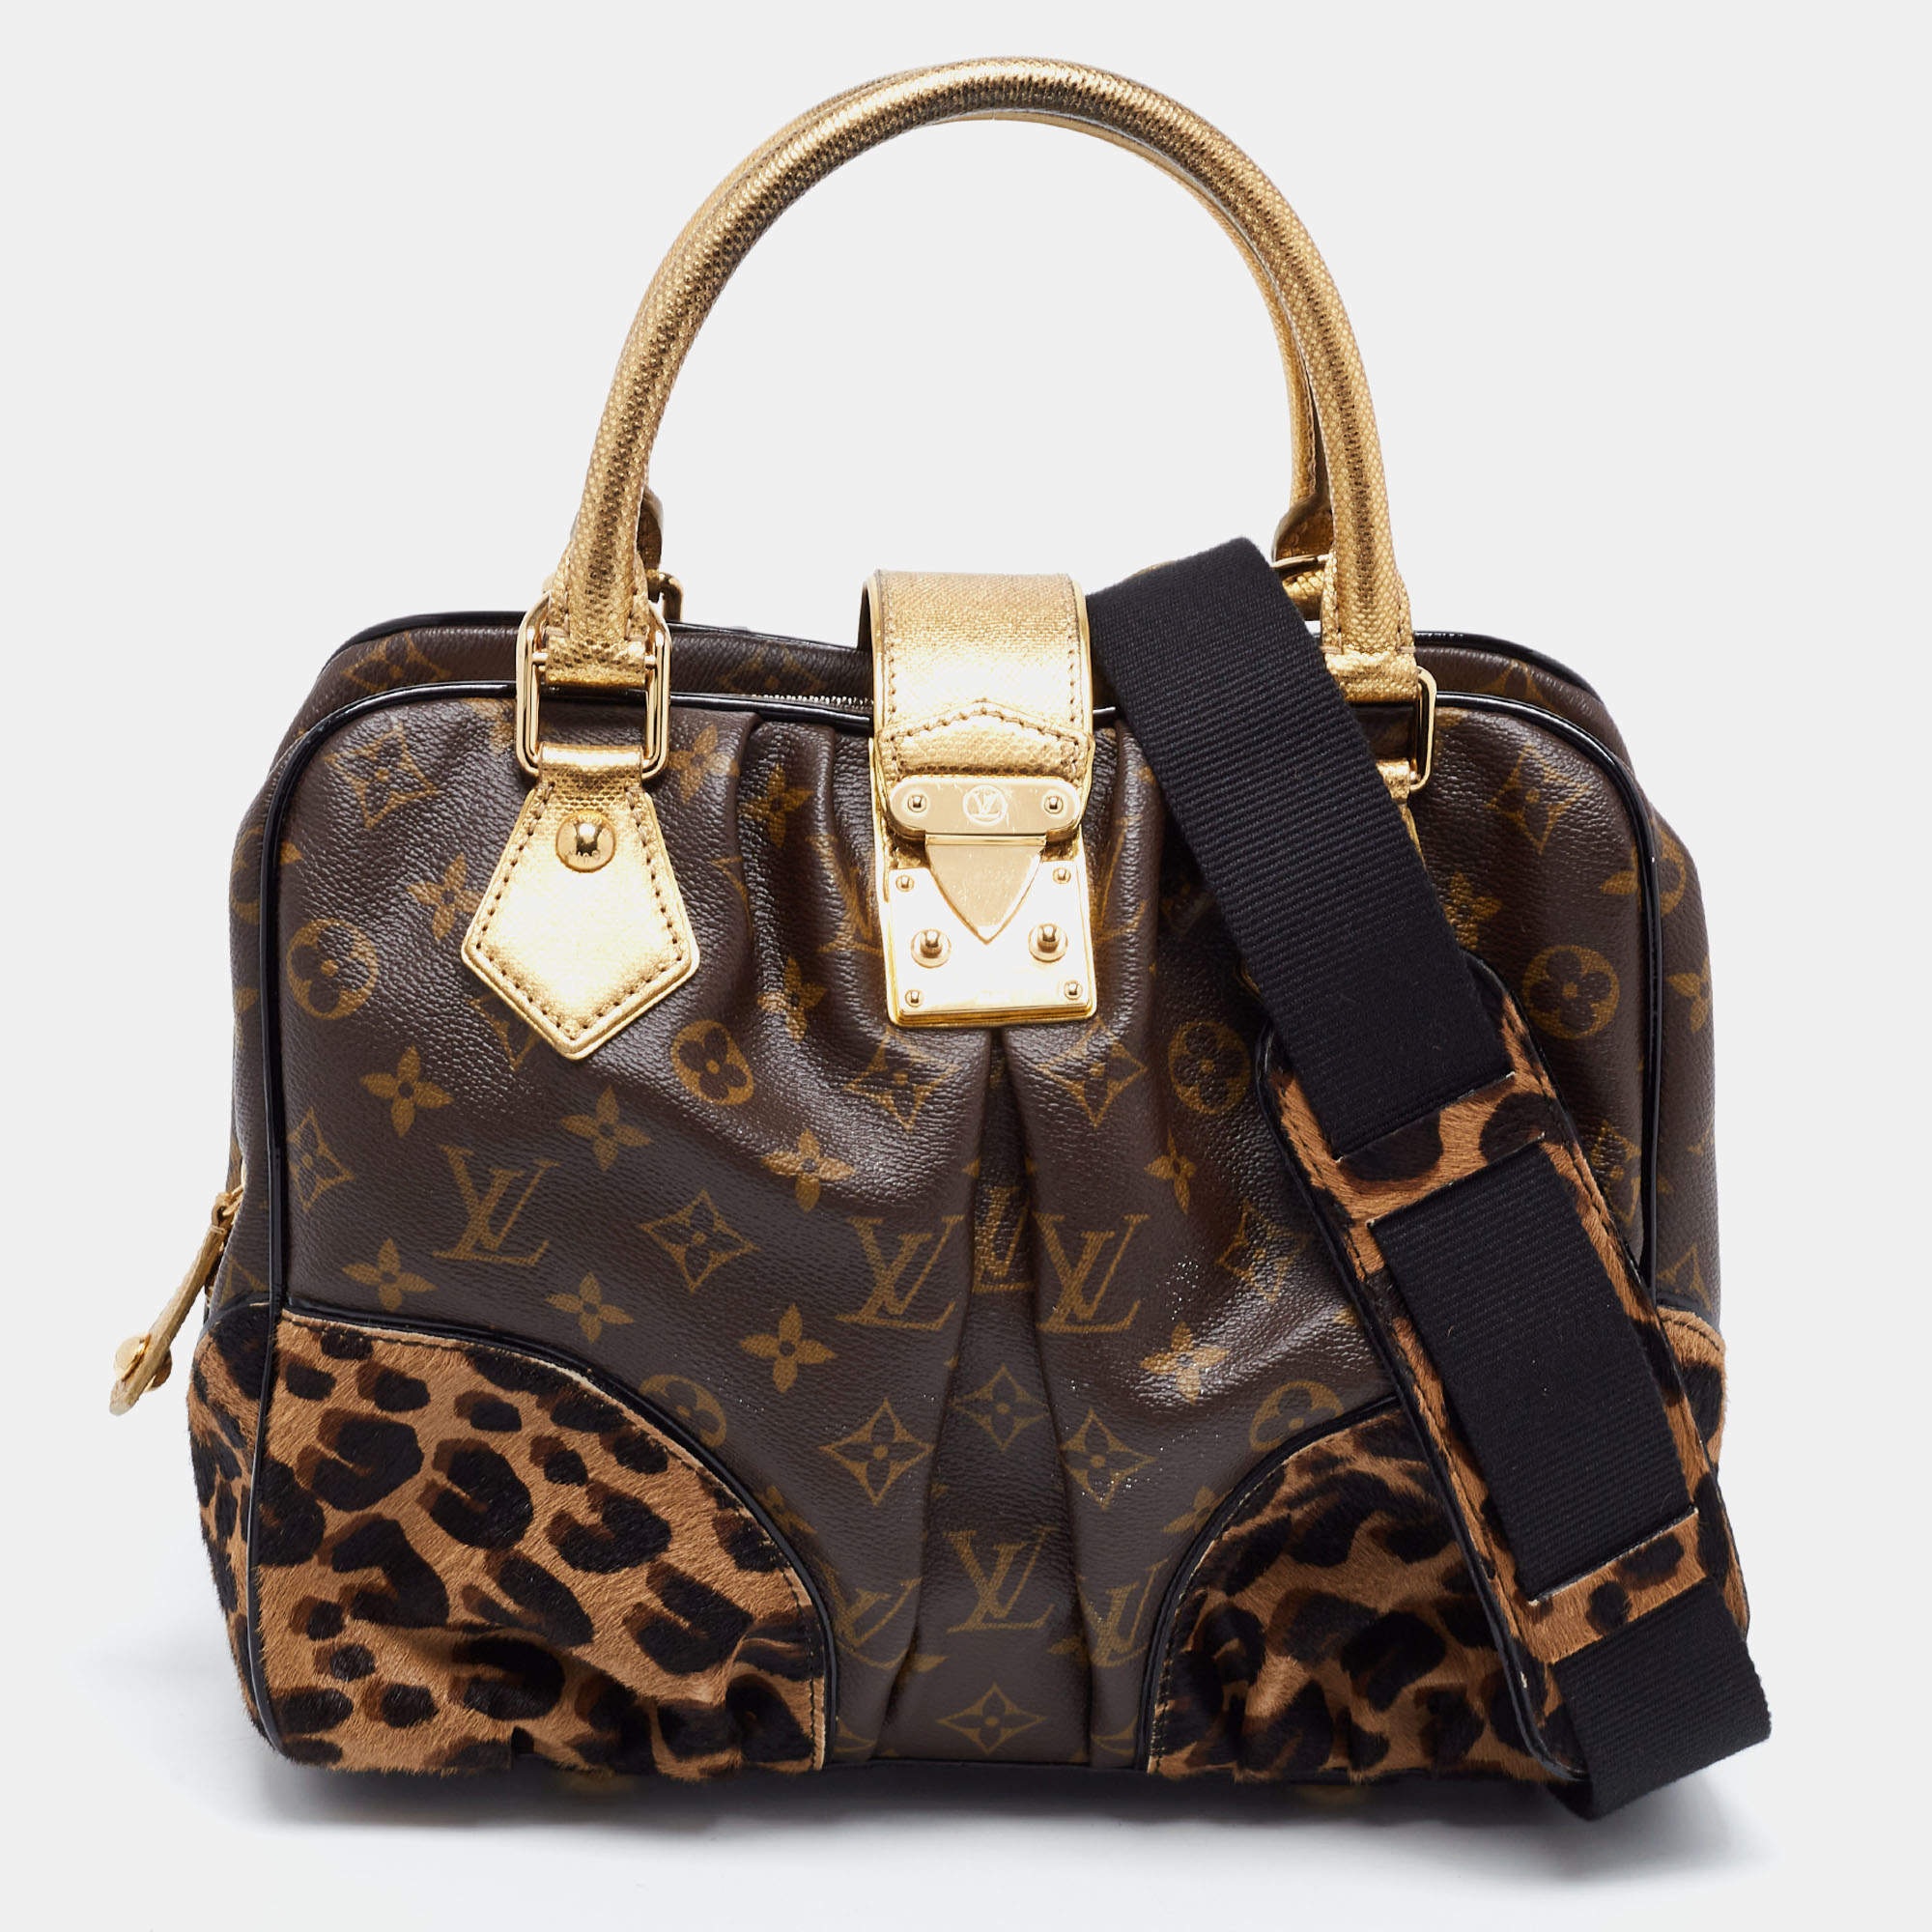 RARE Limited Edition Louis Vuitton Monogram and Leopard Pony Hair Adele Bag